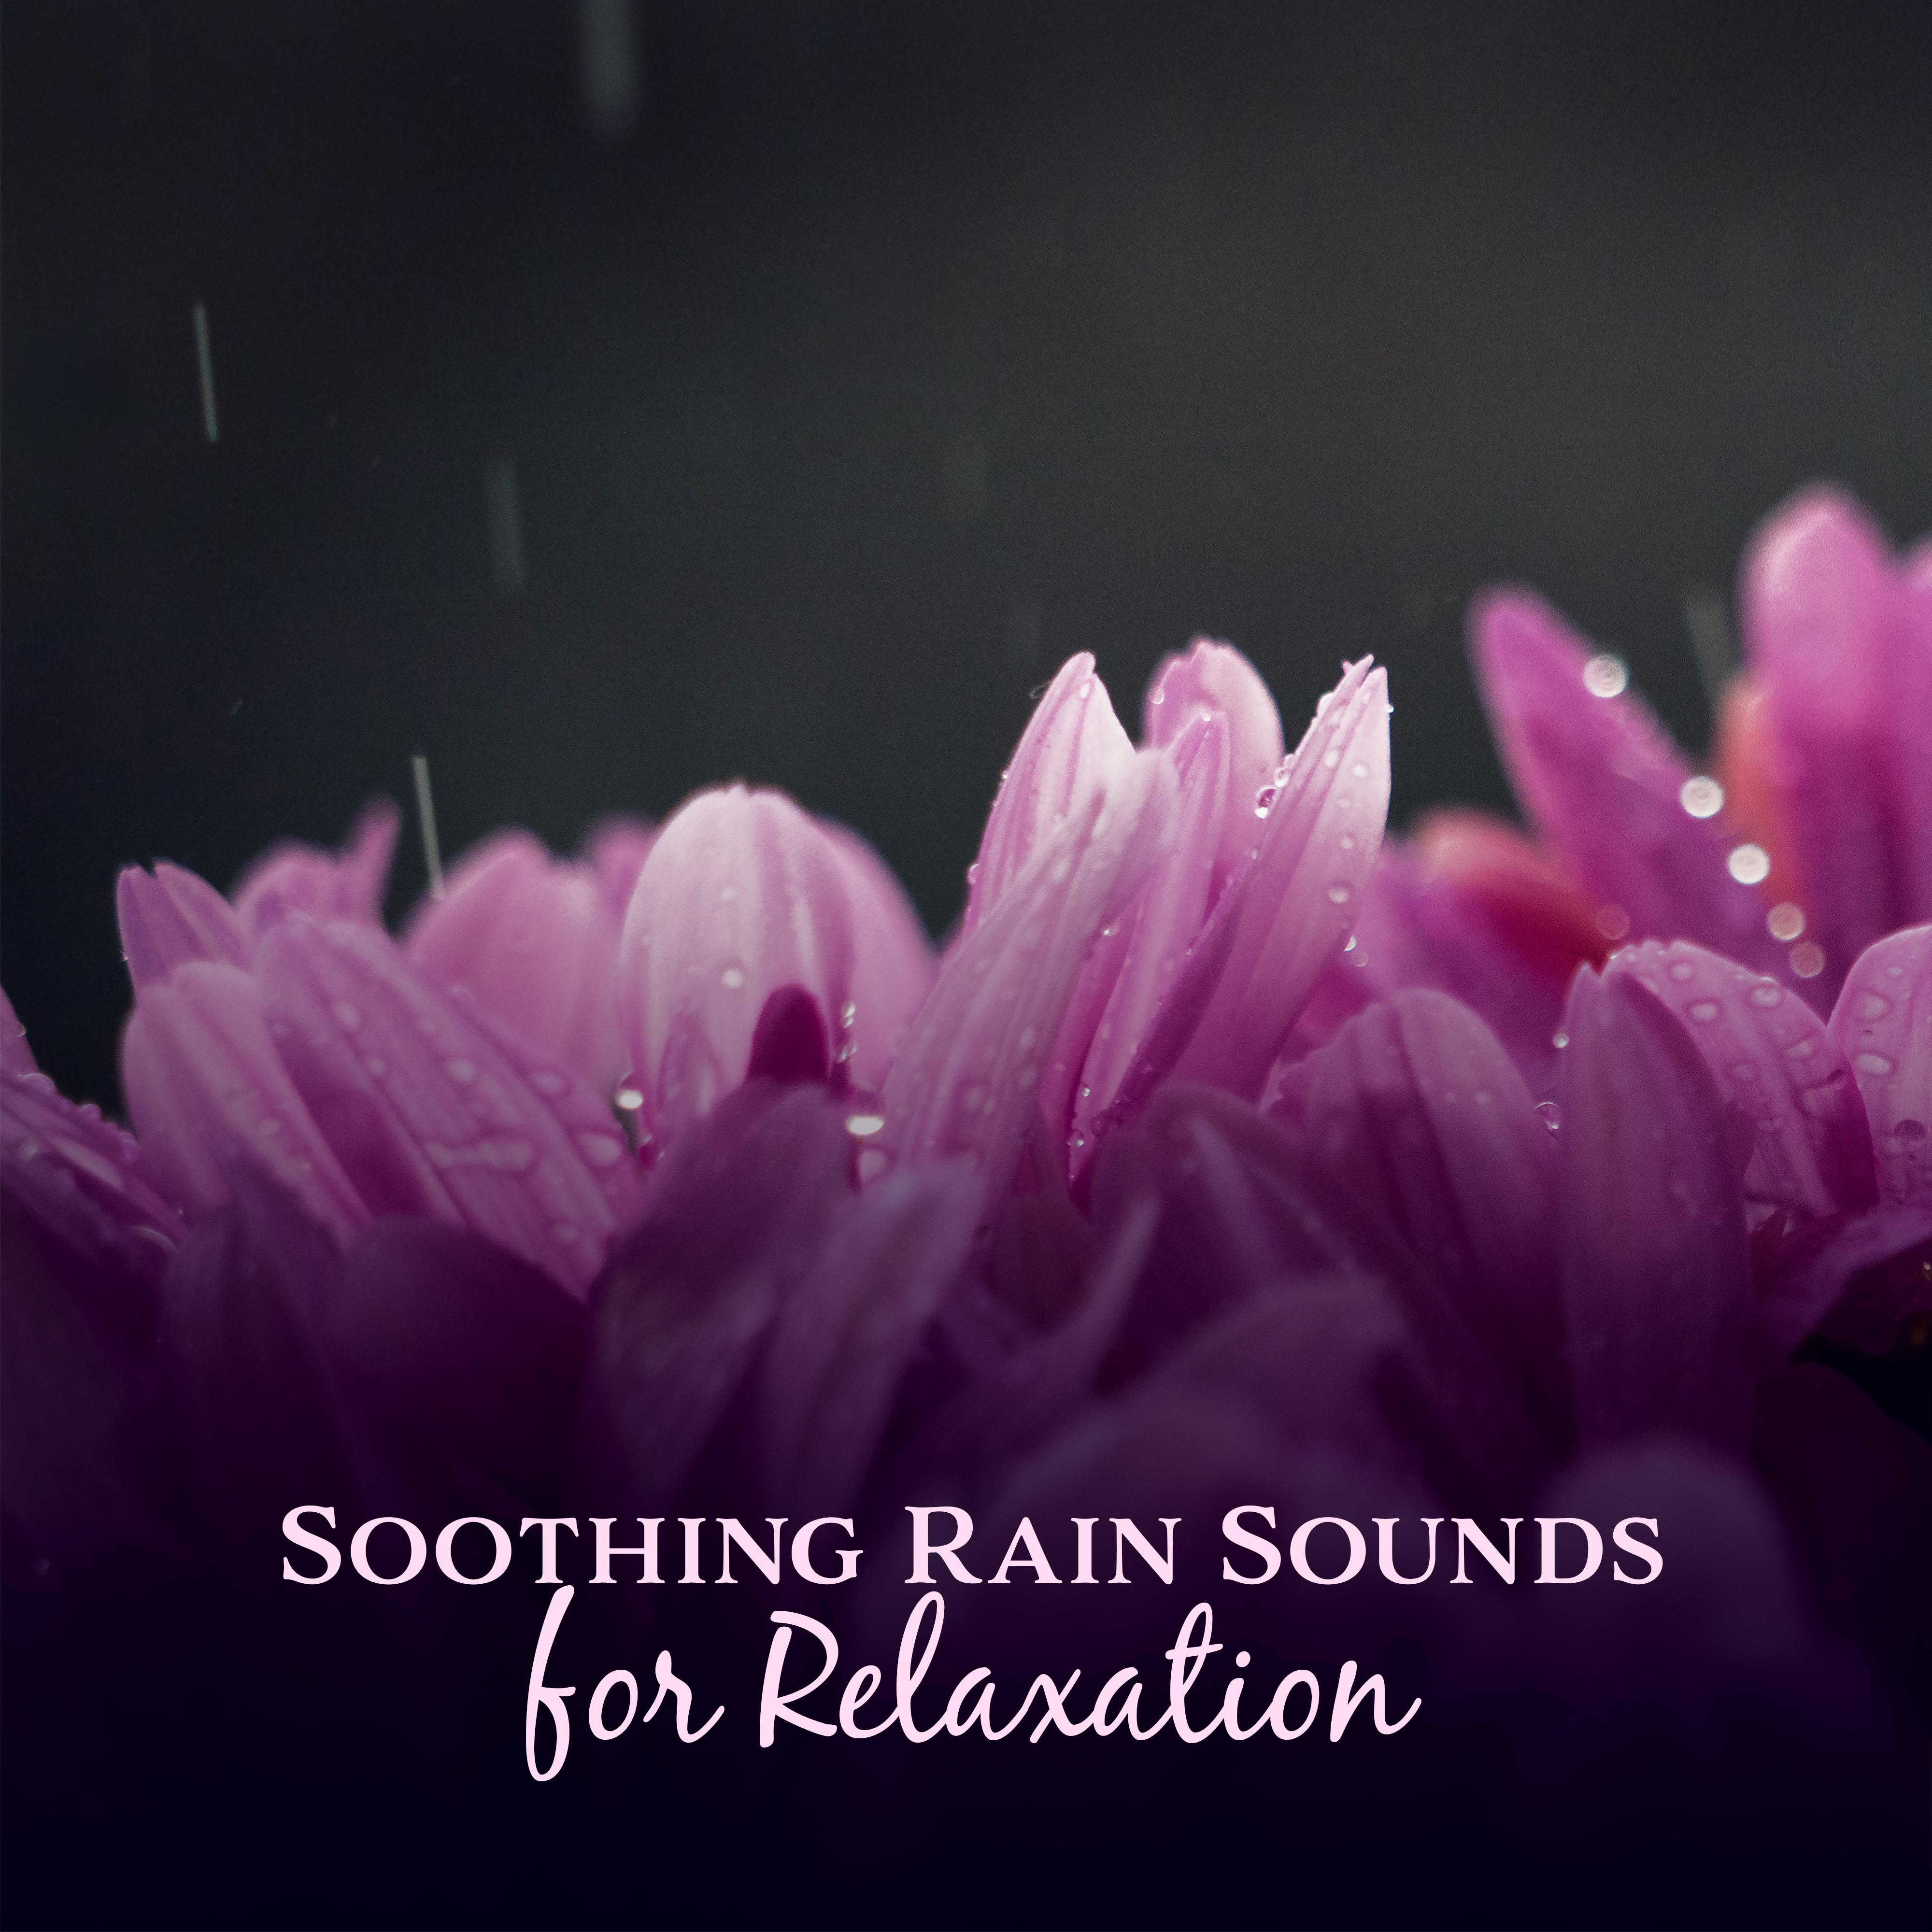 Soothing Rain Sounds for Relaxation  Nature Healing Sounds, Waves of Calmness, Mind Rest